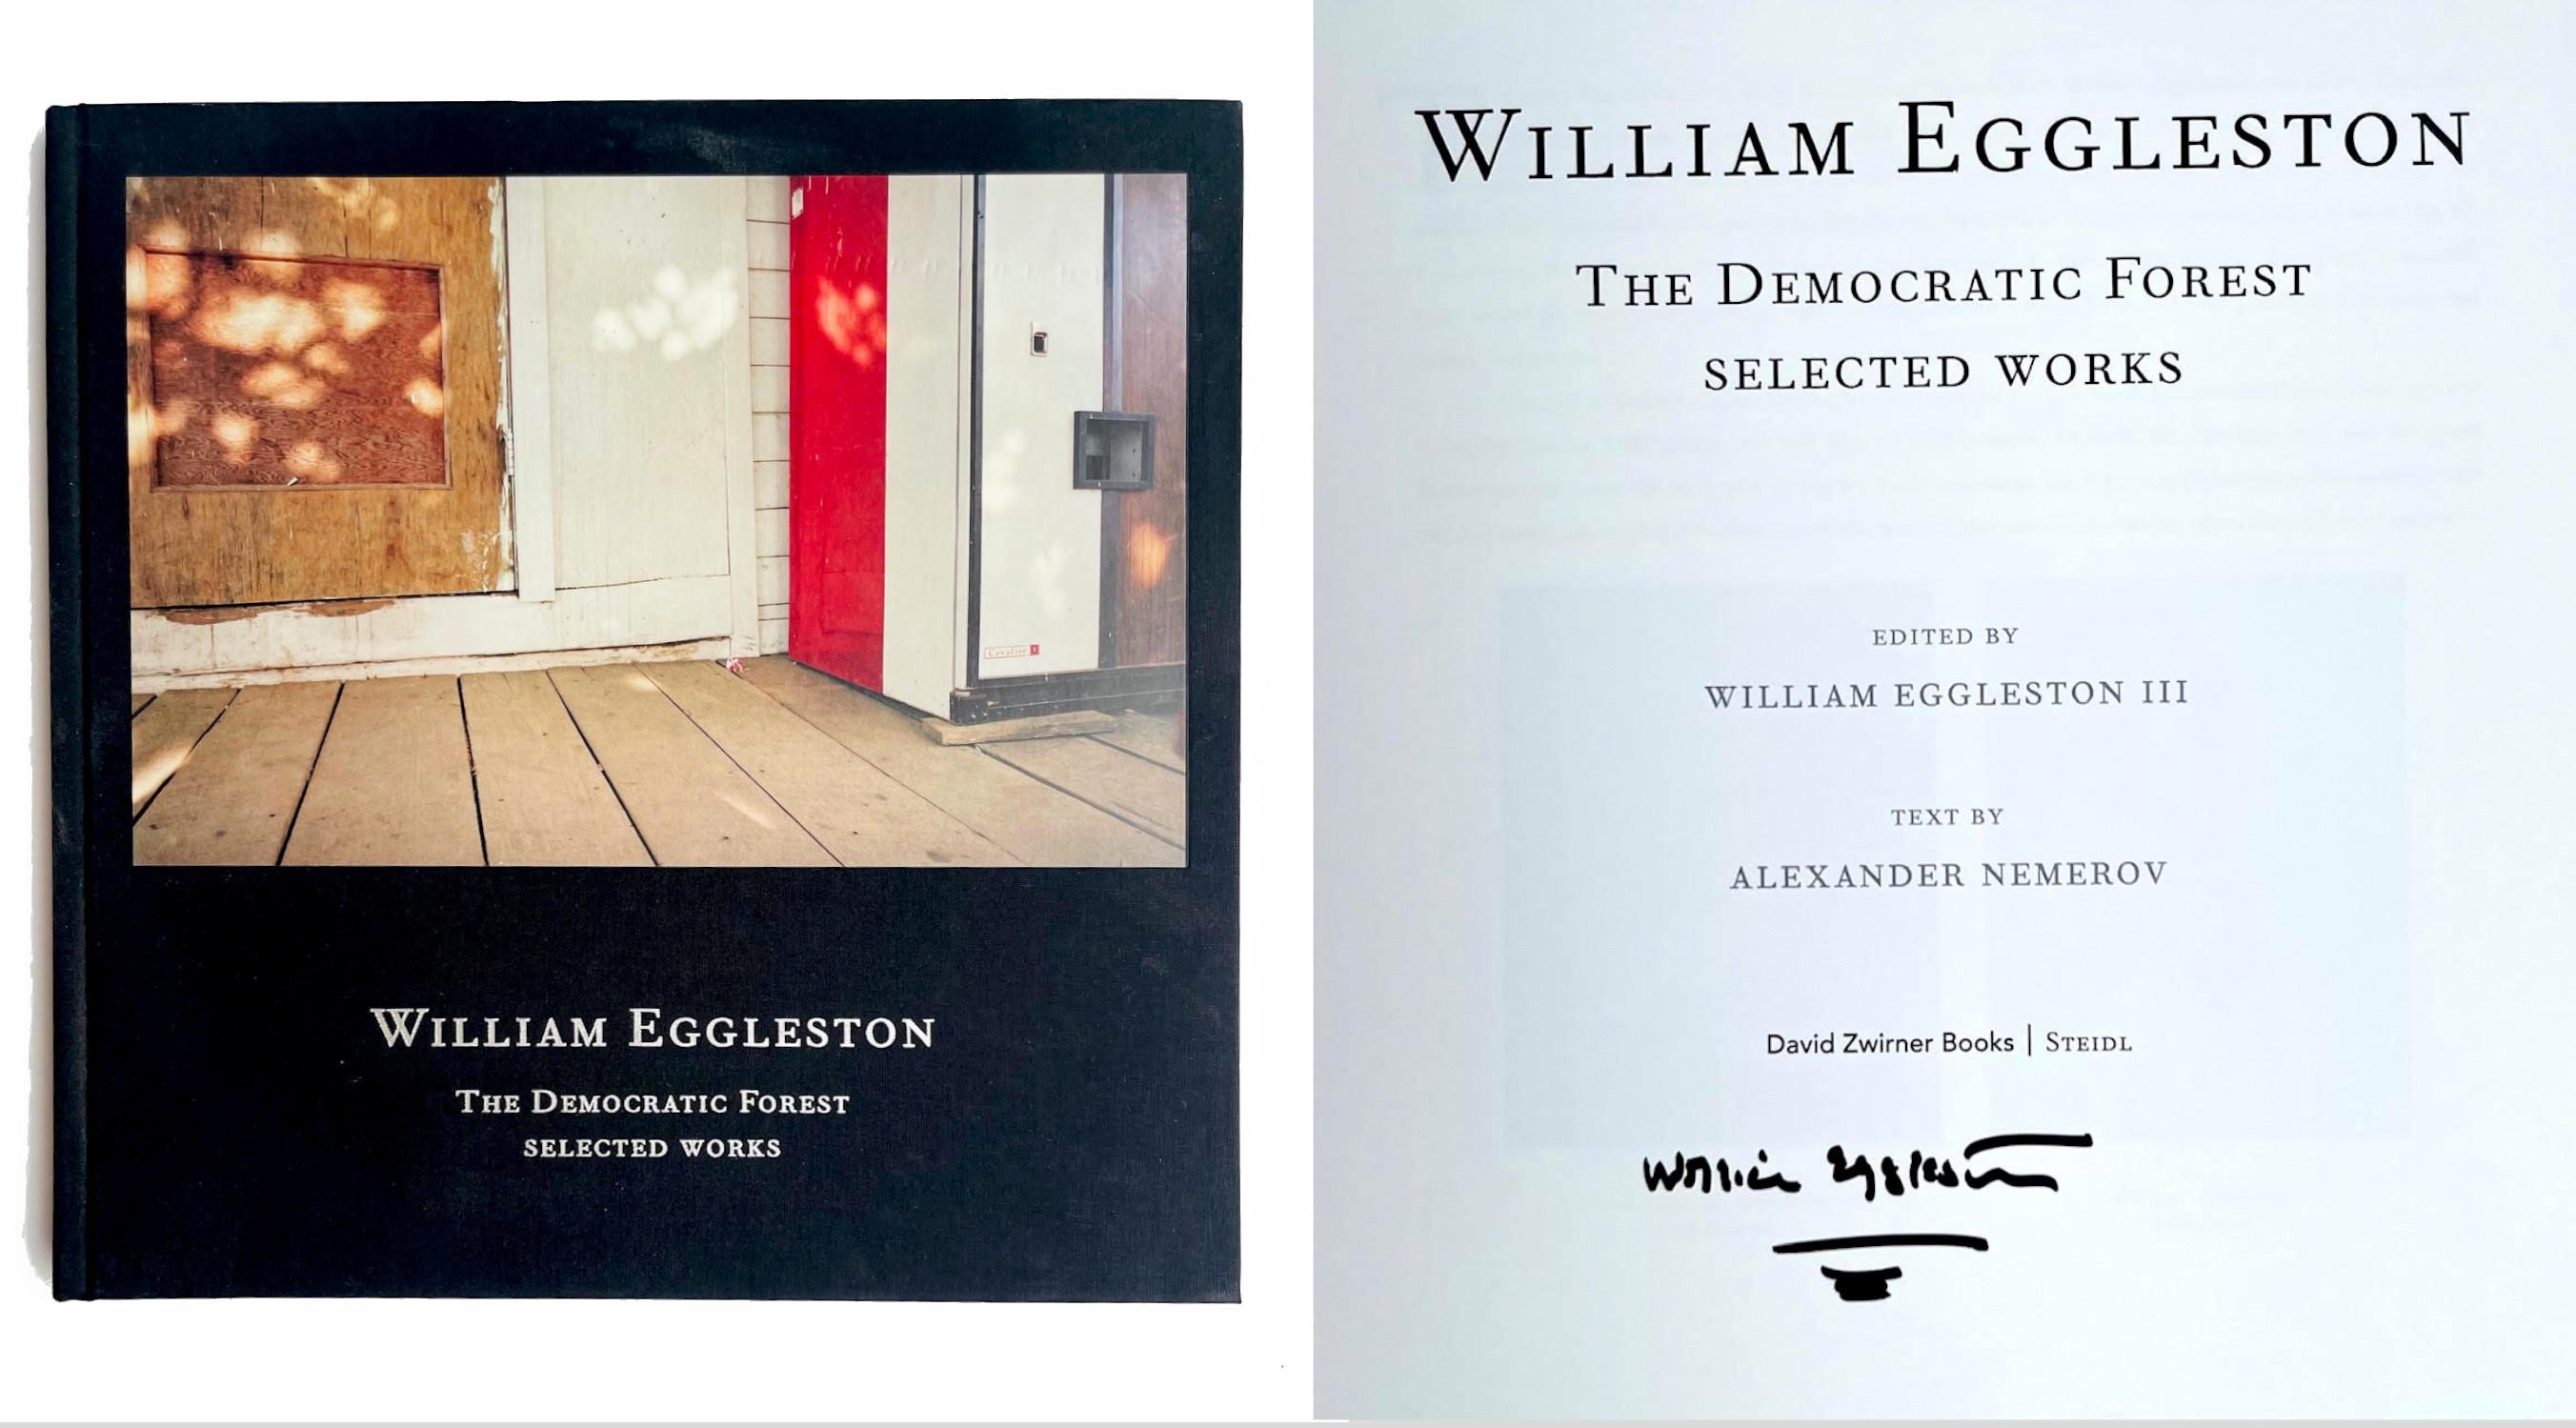 William Eggleston „The Democratic Forest Selected Works“ (Handsigniert)